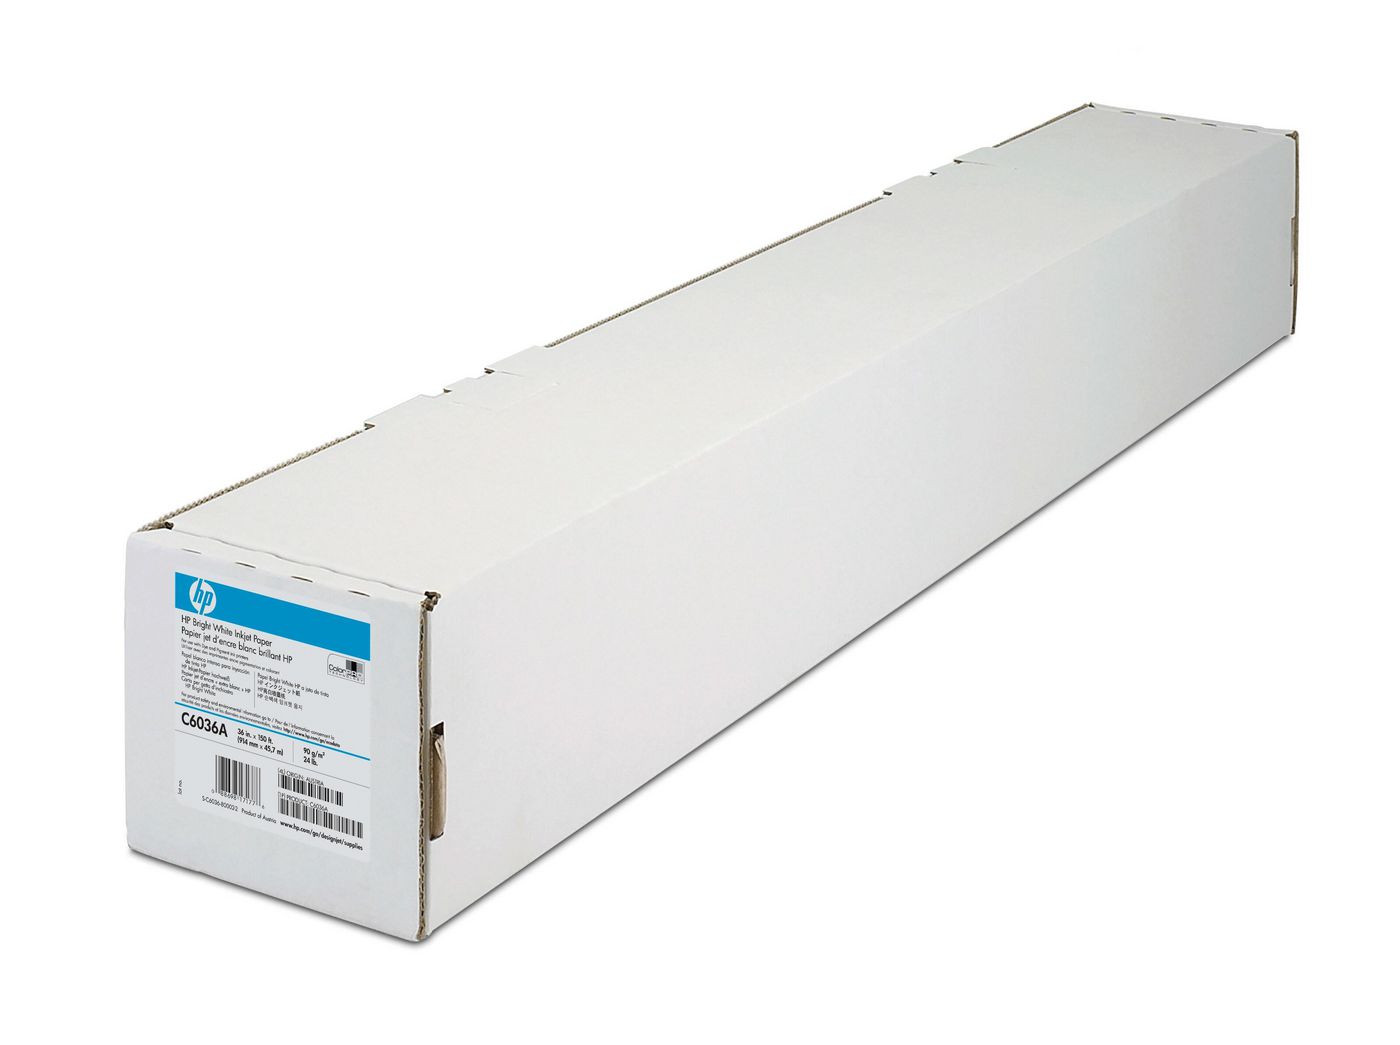 HP C6036A PaperBright White 0.91x4 